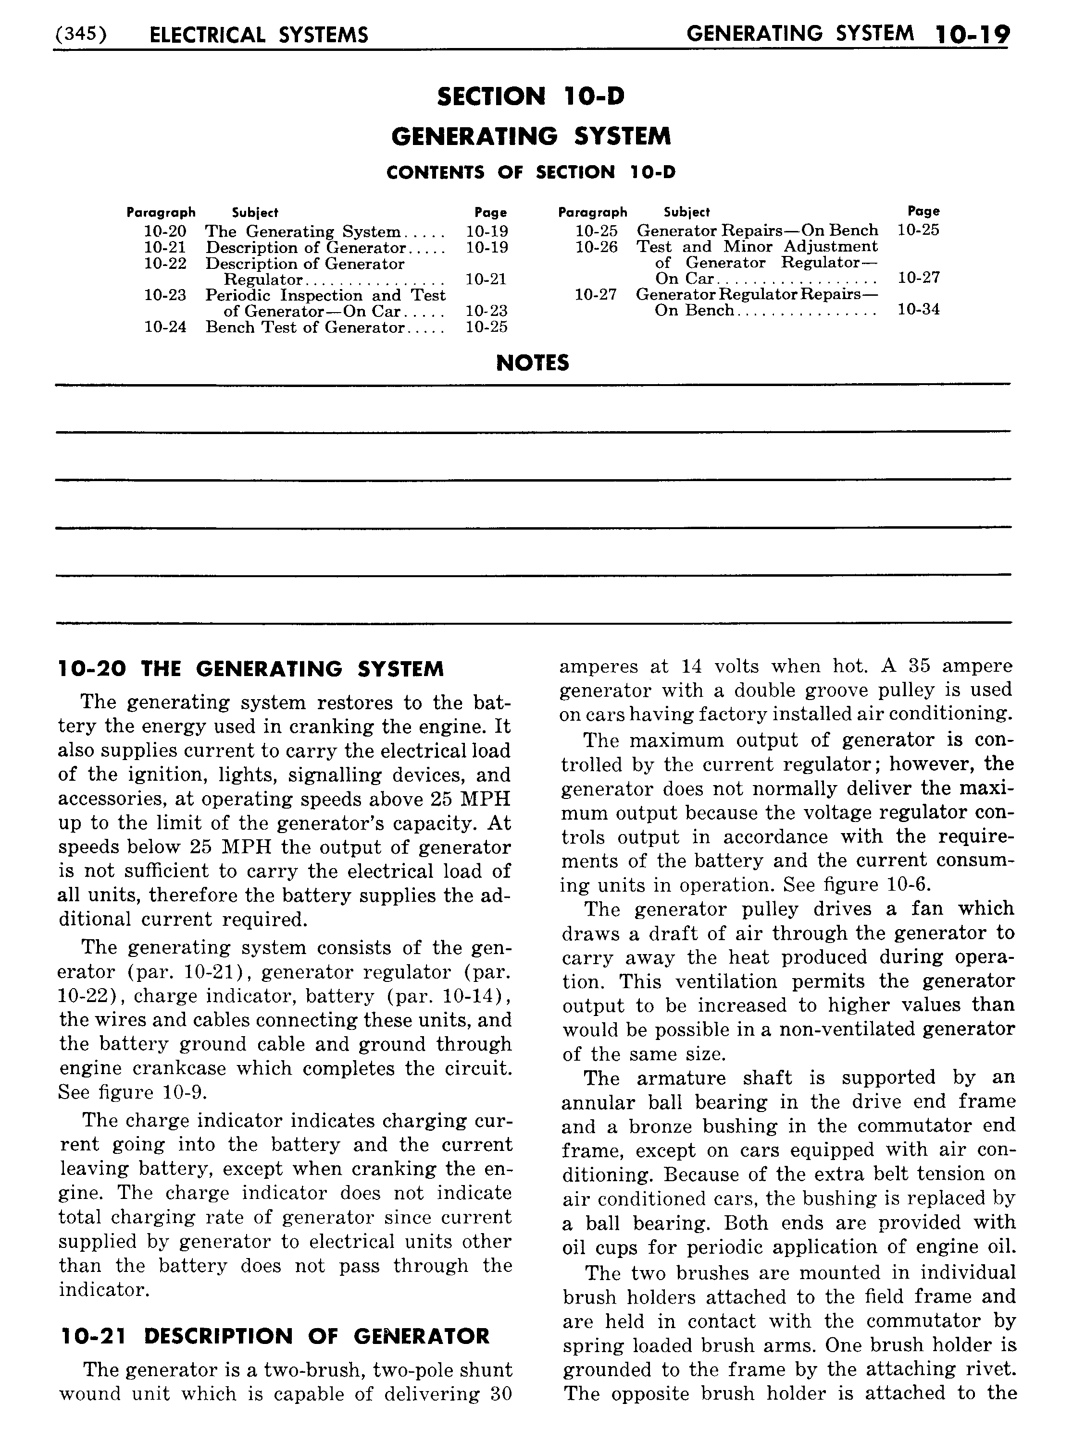 n_11 1956 Buick Shop Manual - Electrical Systems-019-019.jpg